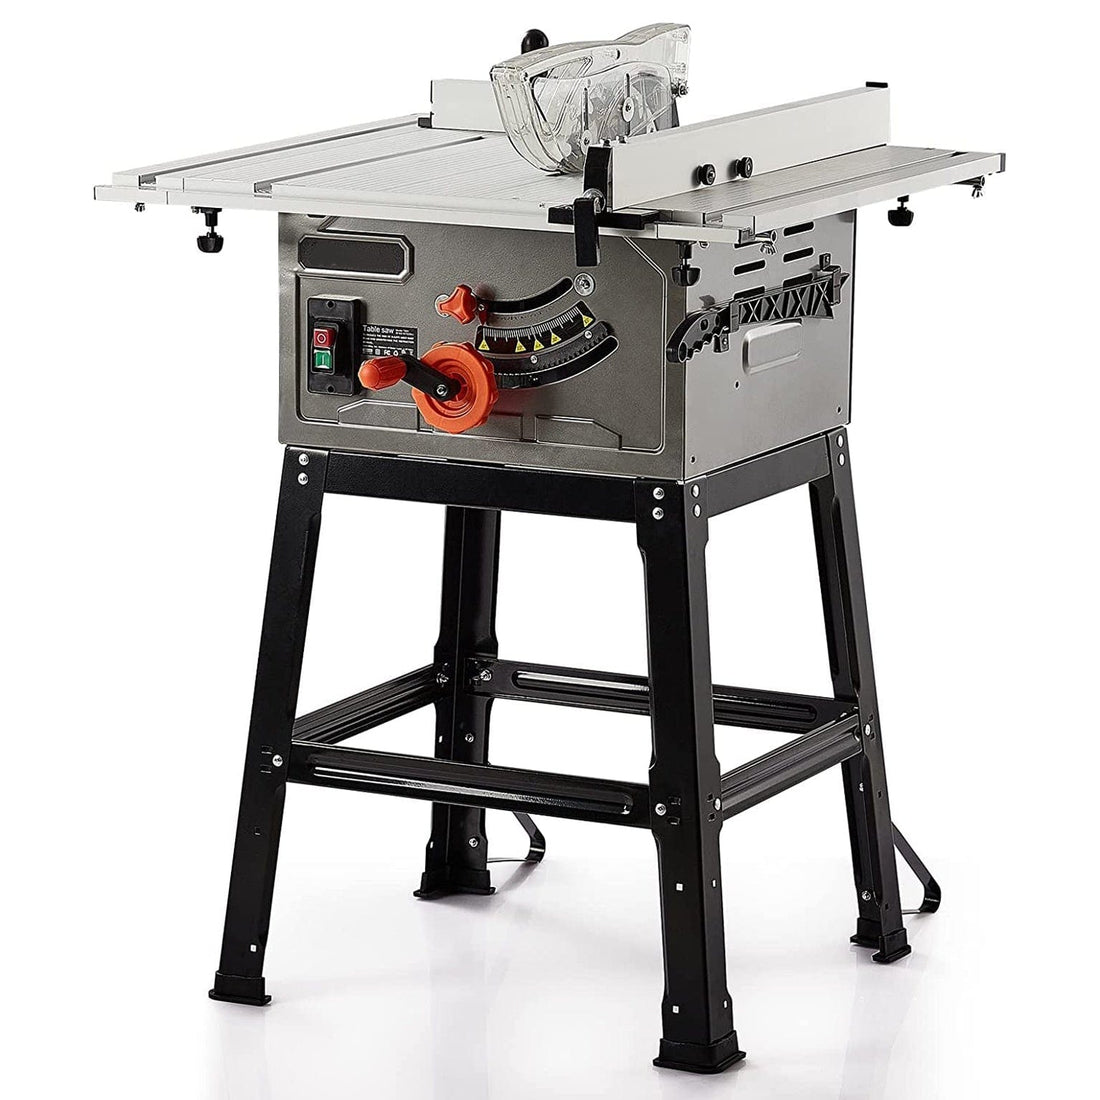 15A 10" Table Saw with Stand - 5000RPM, Cross/Bevel Cuts, Safety Guard, Dust Port